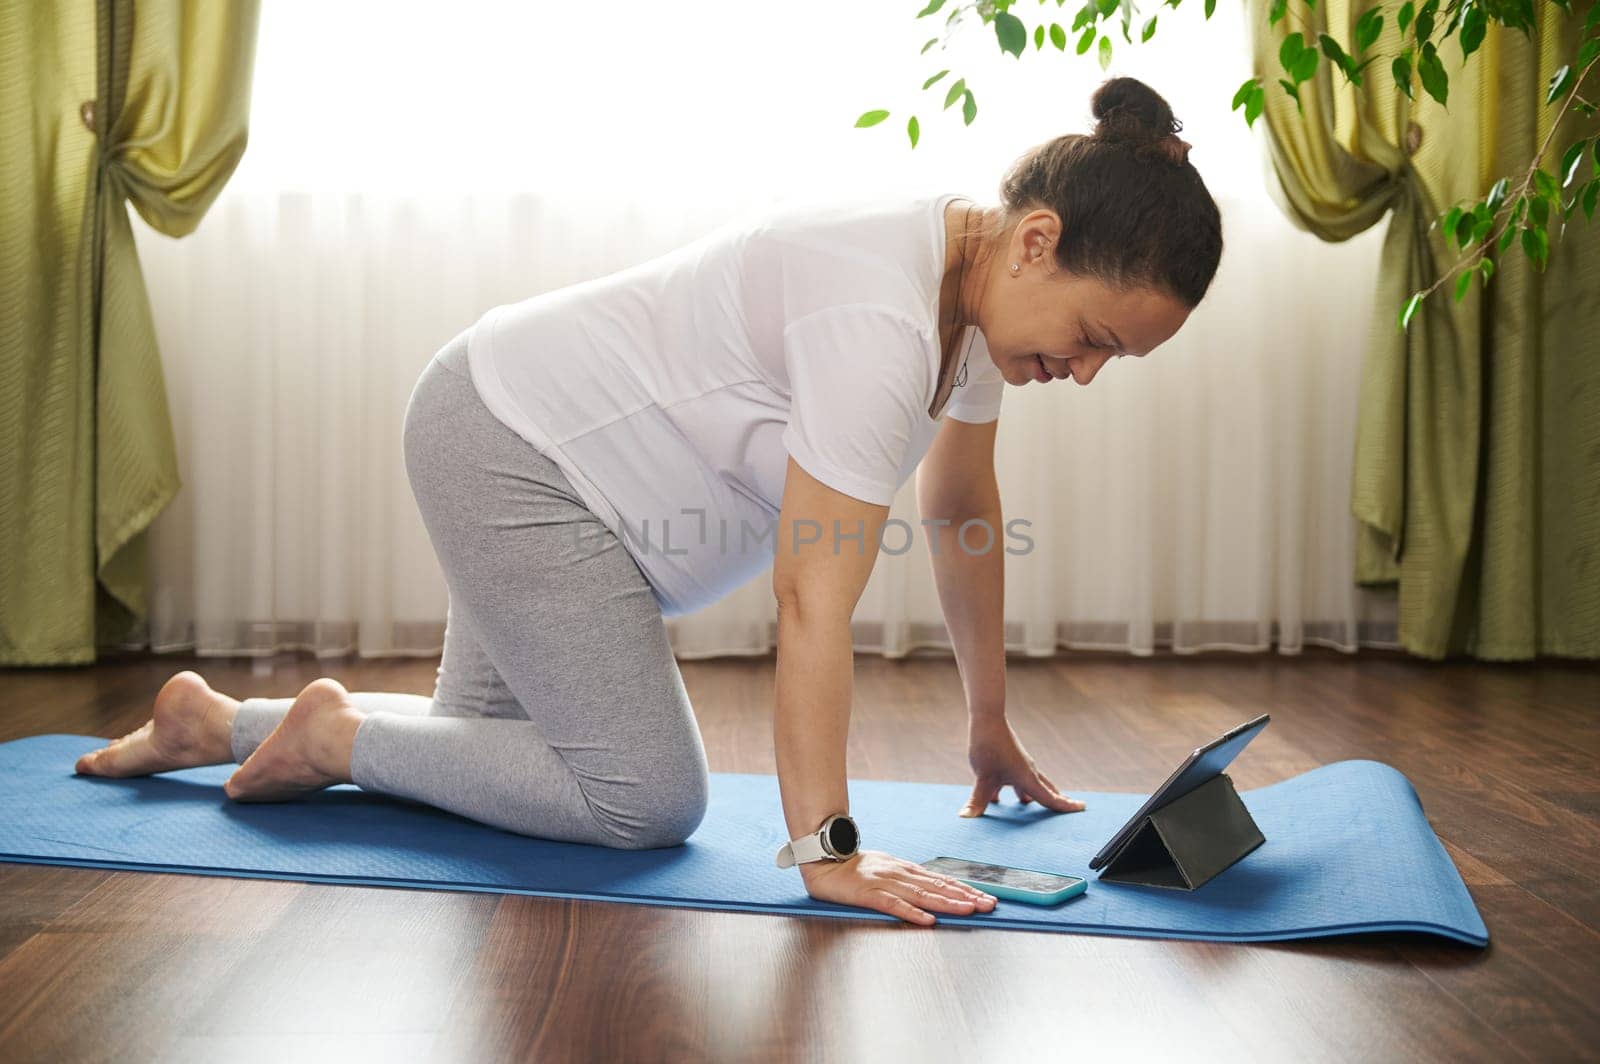 African American active pregnant woman using smartphone during online yoga practice, standing in table posture on a blue exercise mat. Pregnancy. Maternity. People. Sport. technology. Mobile app.